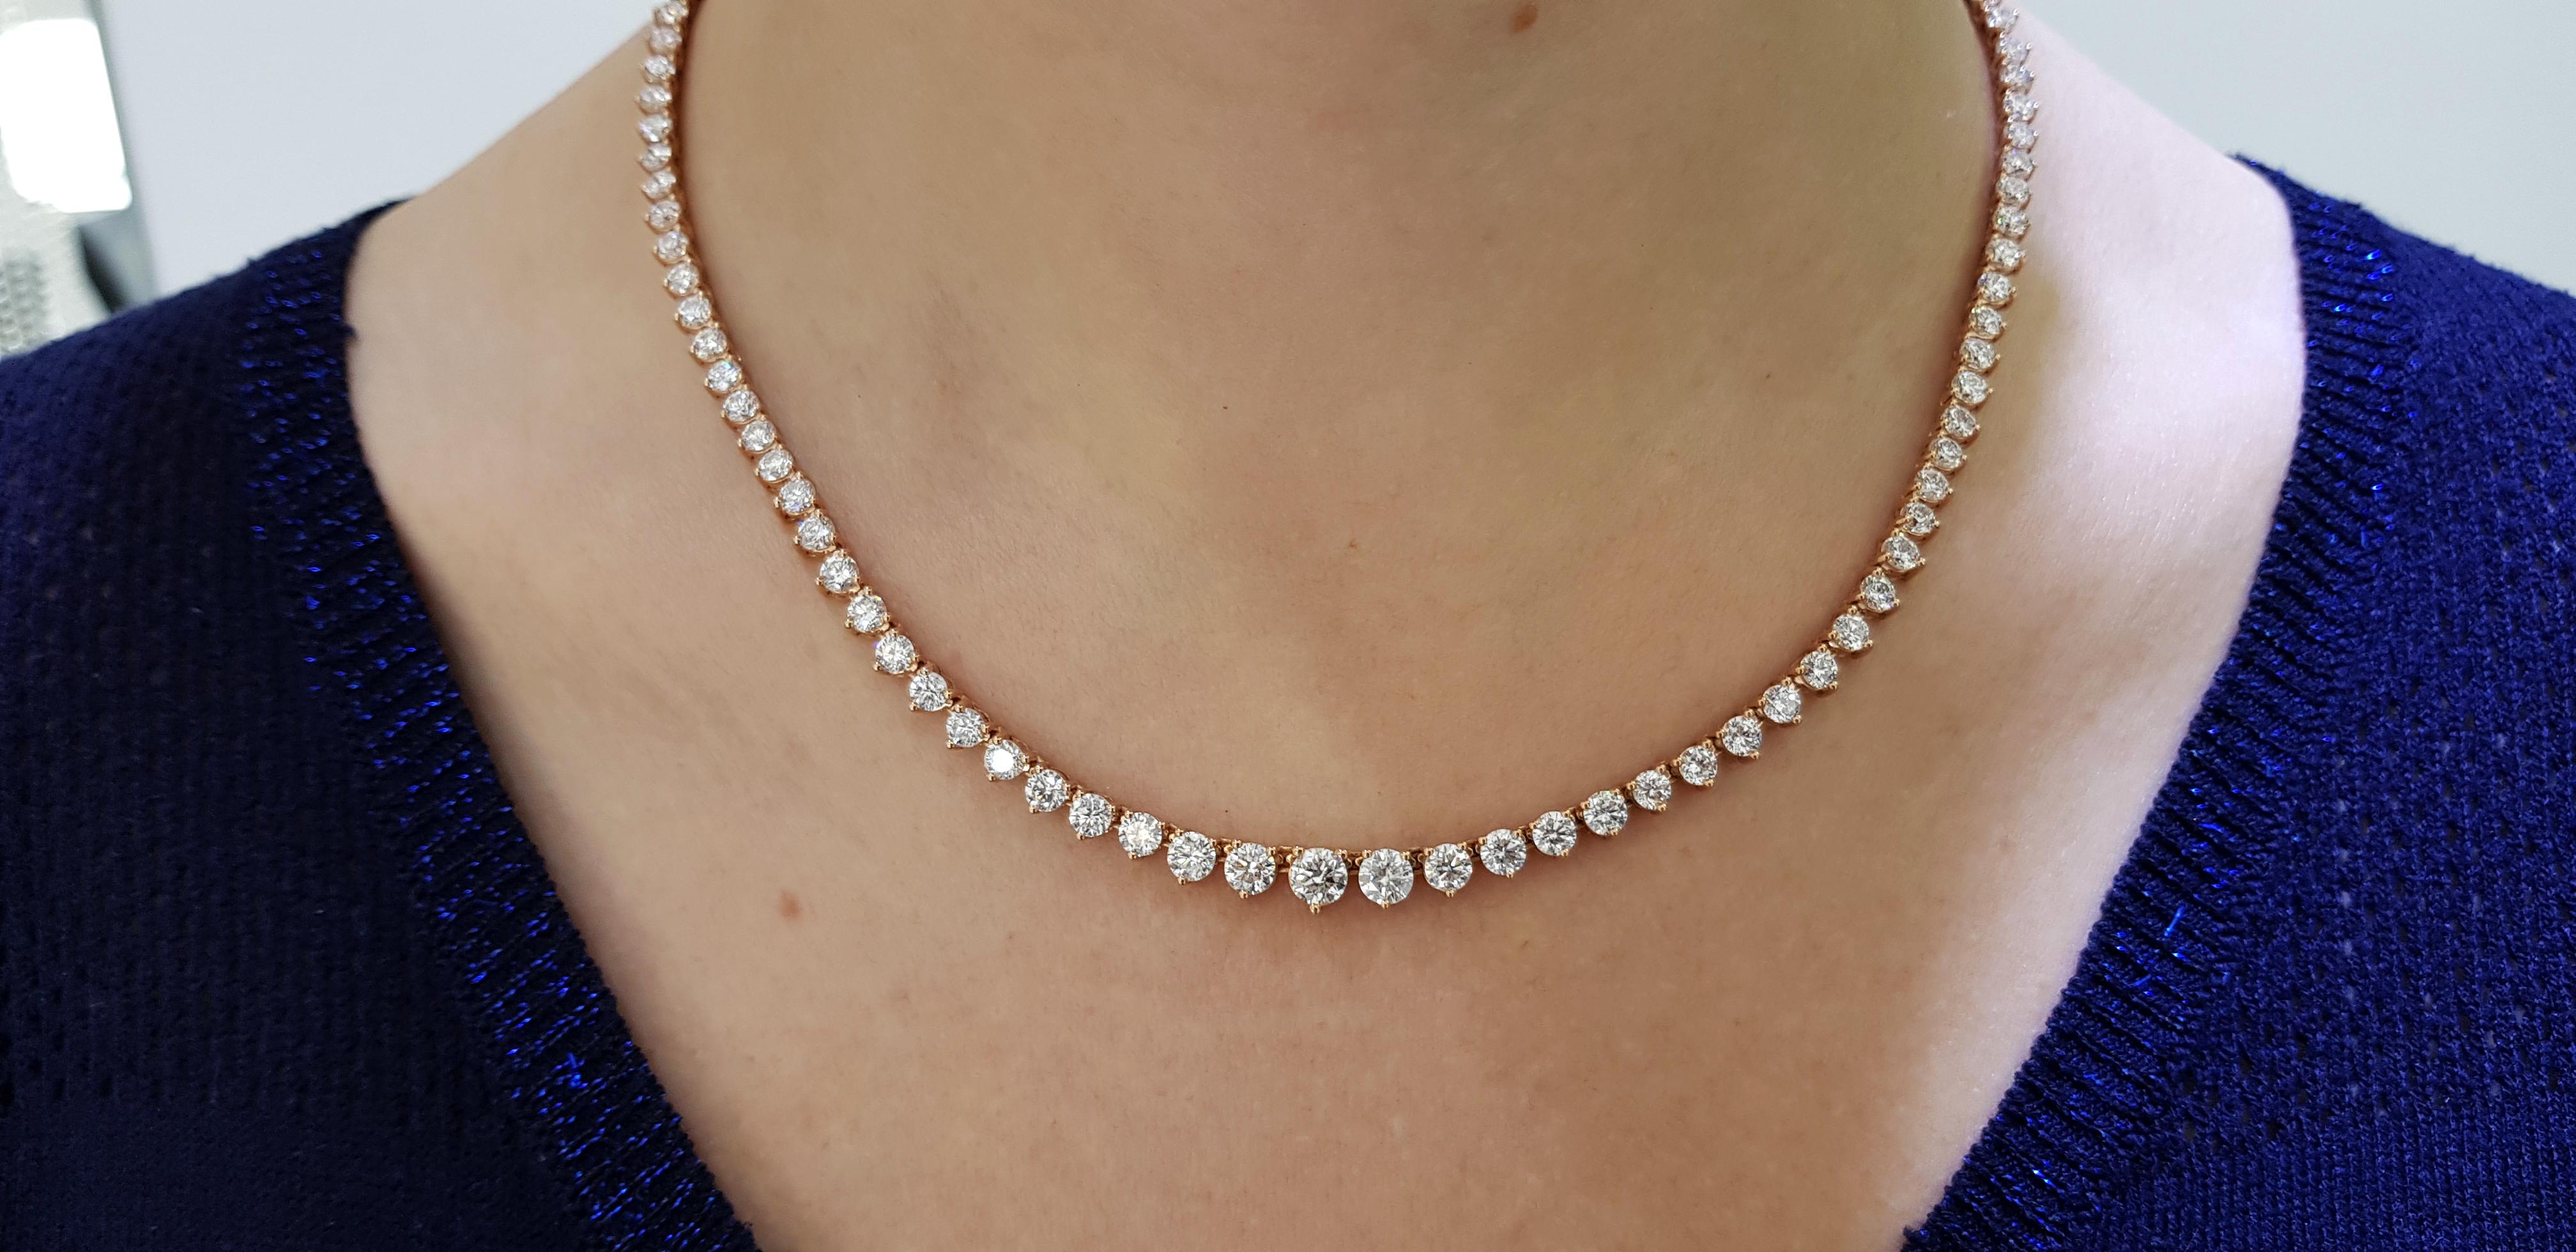 This stunning and impressive Riviera Necklace features total Diamond weight of 15.00 Carats in beautifully graduated Round Brilliant Cut gems with a sparkly white color G/H clarity SI1. Each stone has a three claw setting with open gallery and set